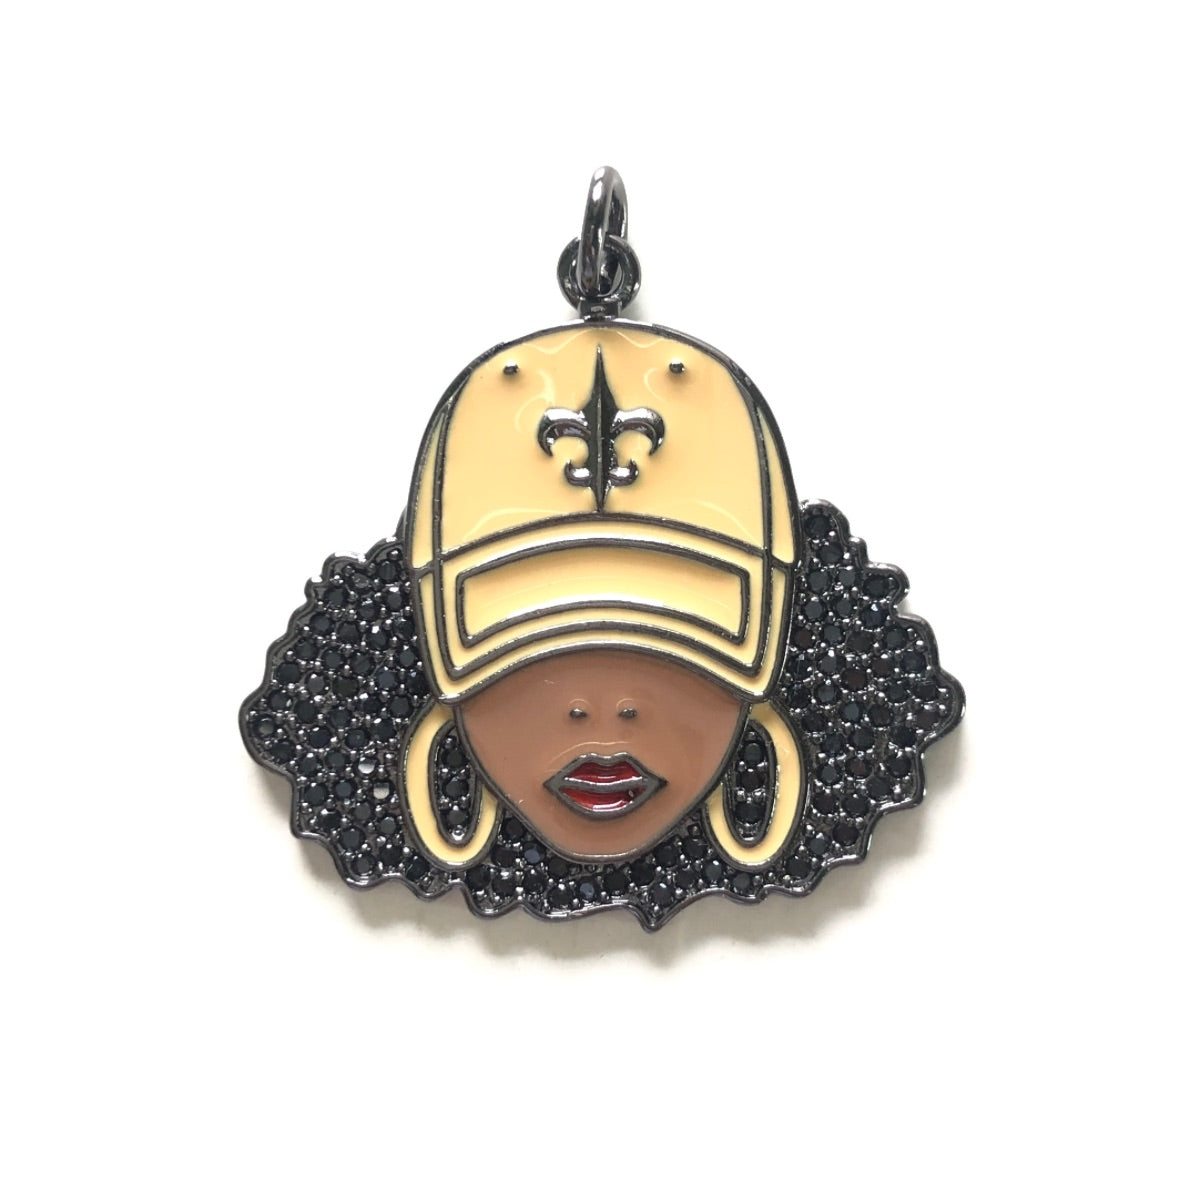 10pcs/lot 34*33mm CZ Paved Afro Black Who Dat Girl Saints Charms CZ Paved Charms Afro Girl/Queen Charms American Football Sports Louisiana Inspired New Charms Arrivals Charms Beads Beyond